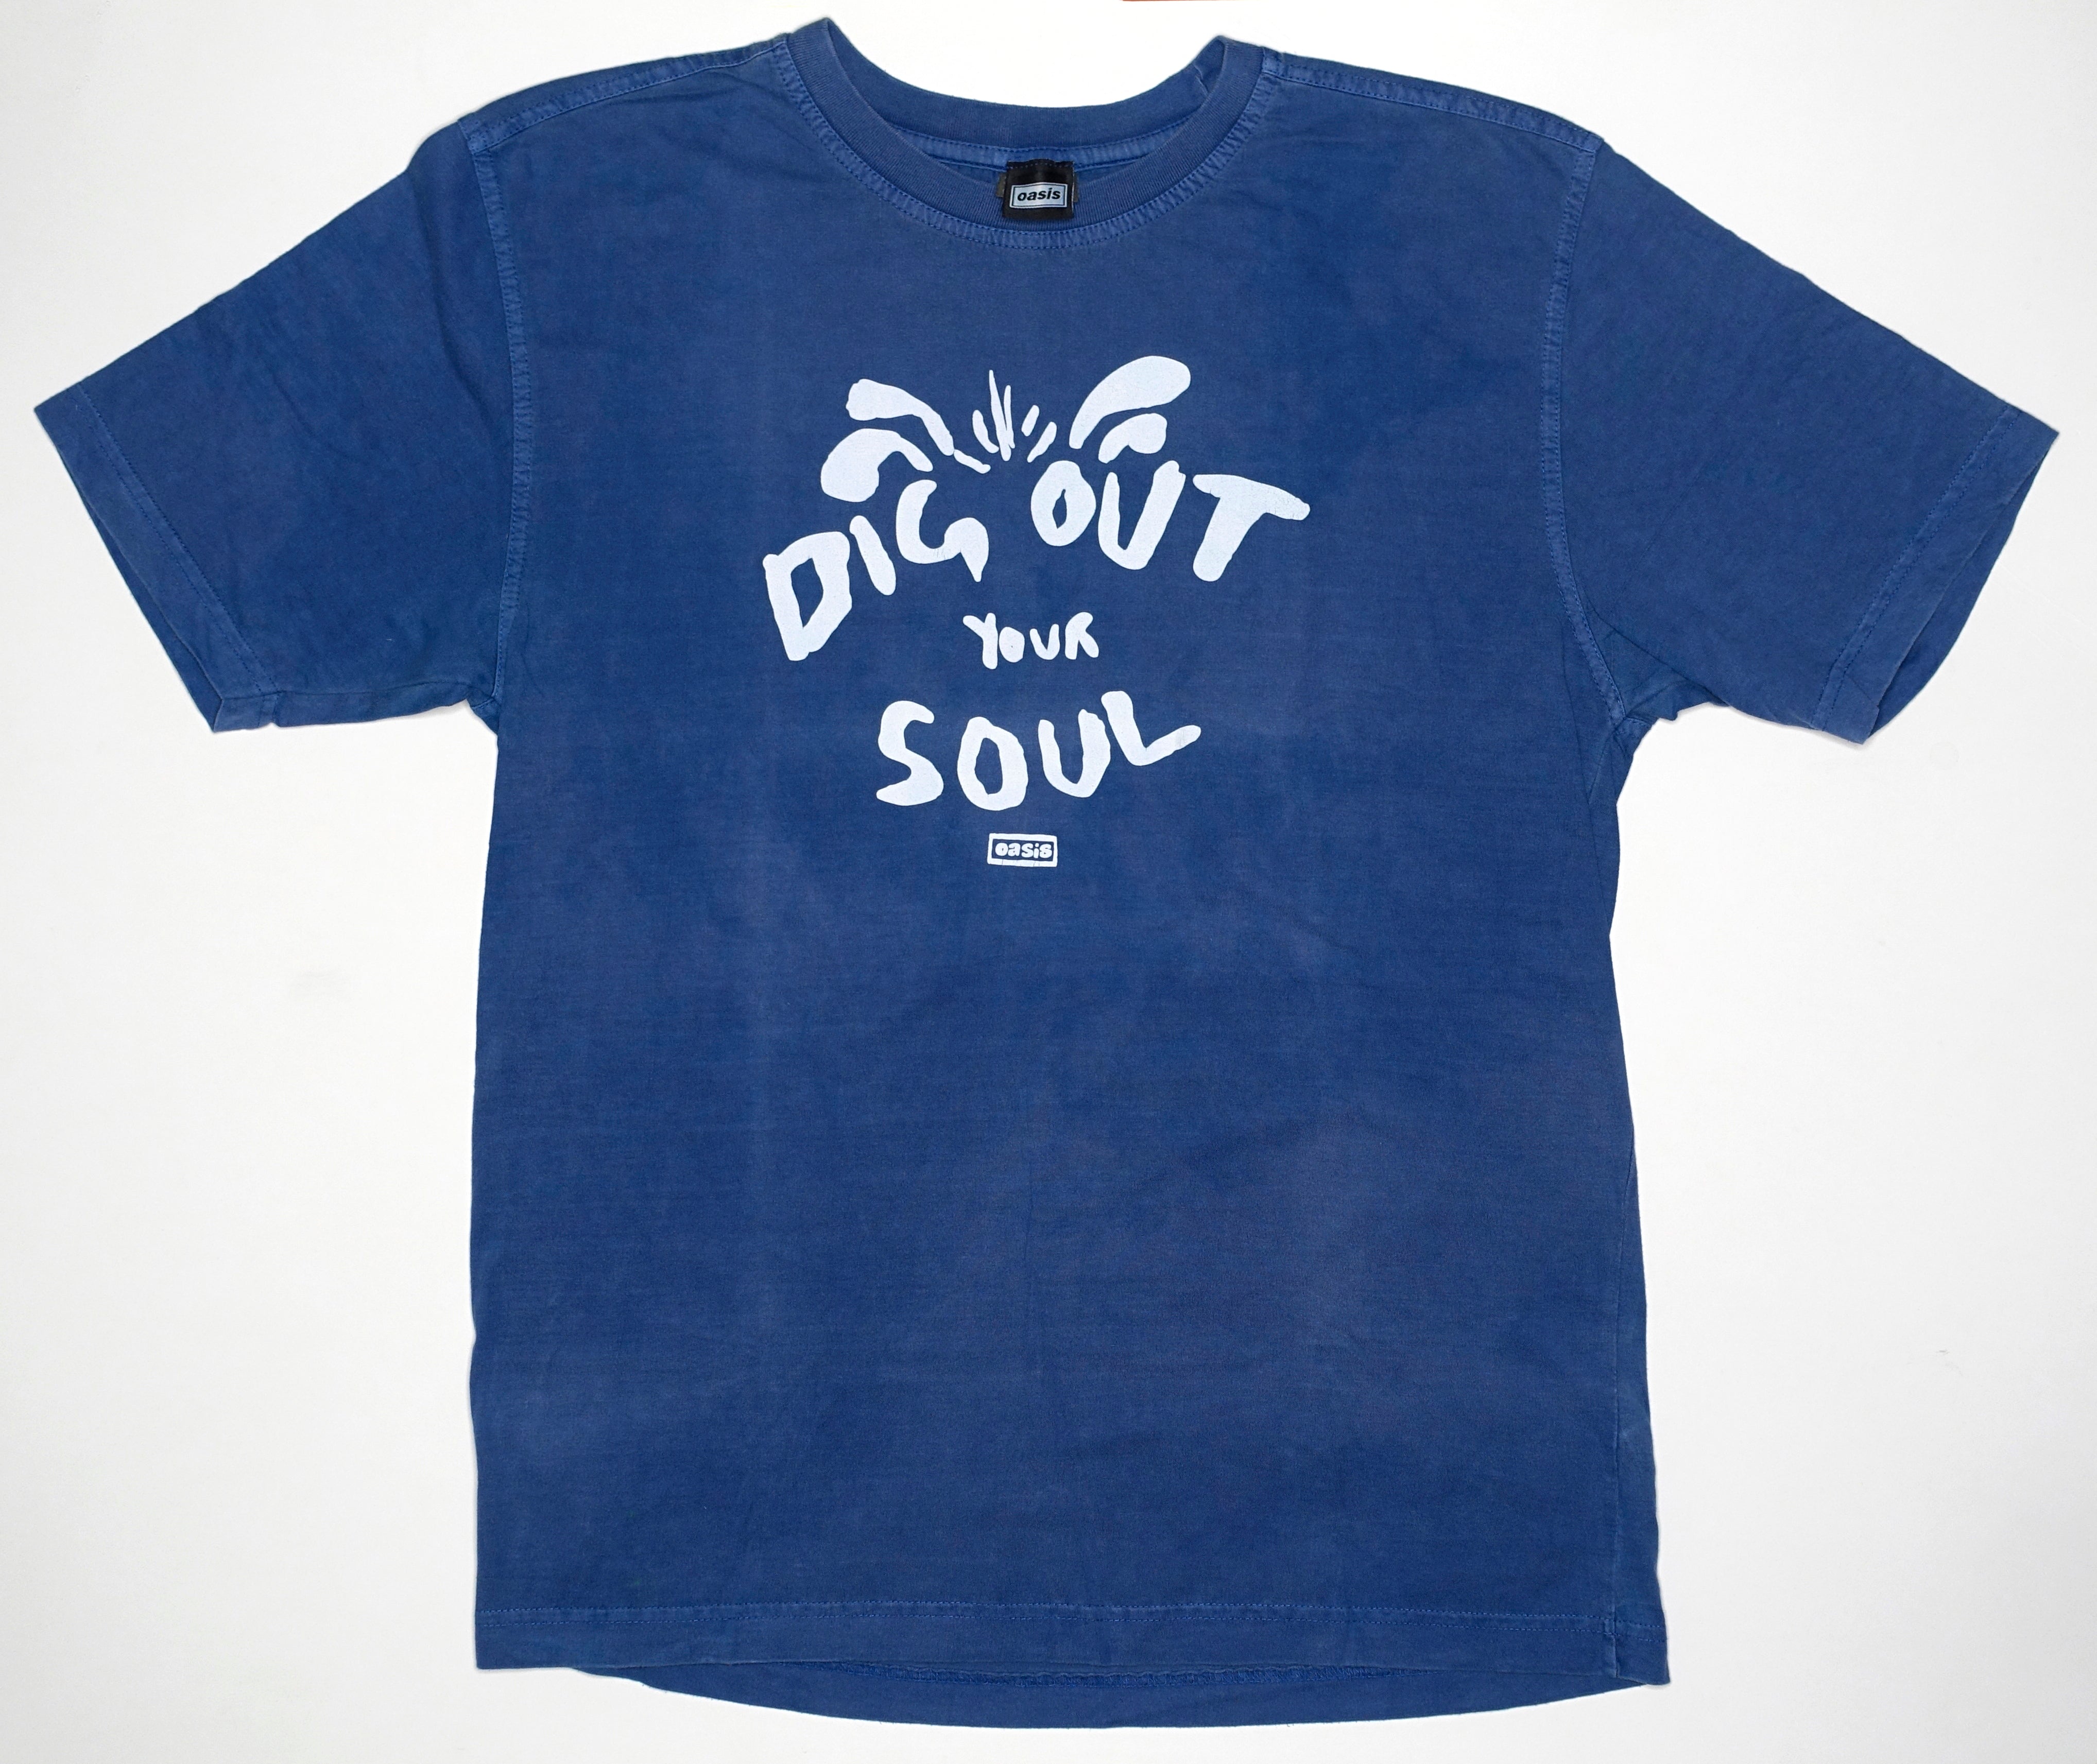 Oasis - Dig Out Your Soul 2008 Tour Shirt Size Large (Navy)